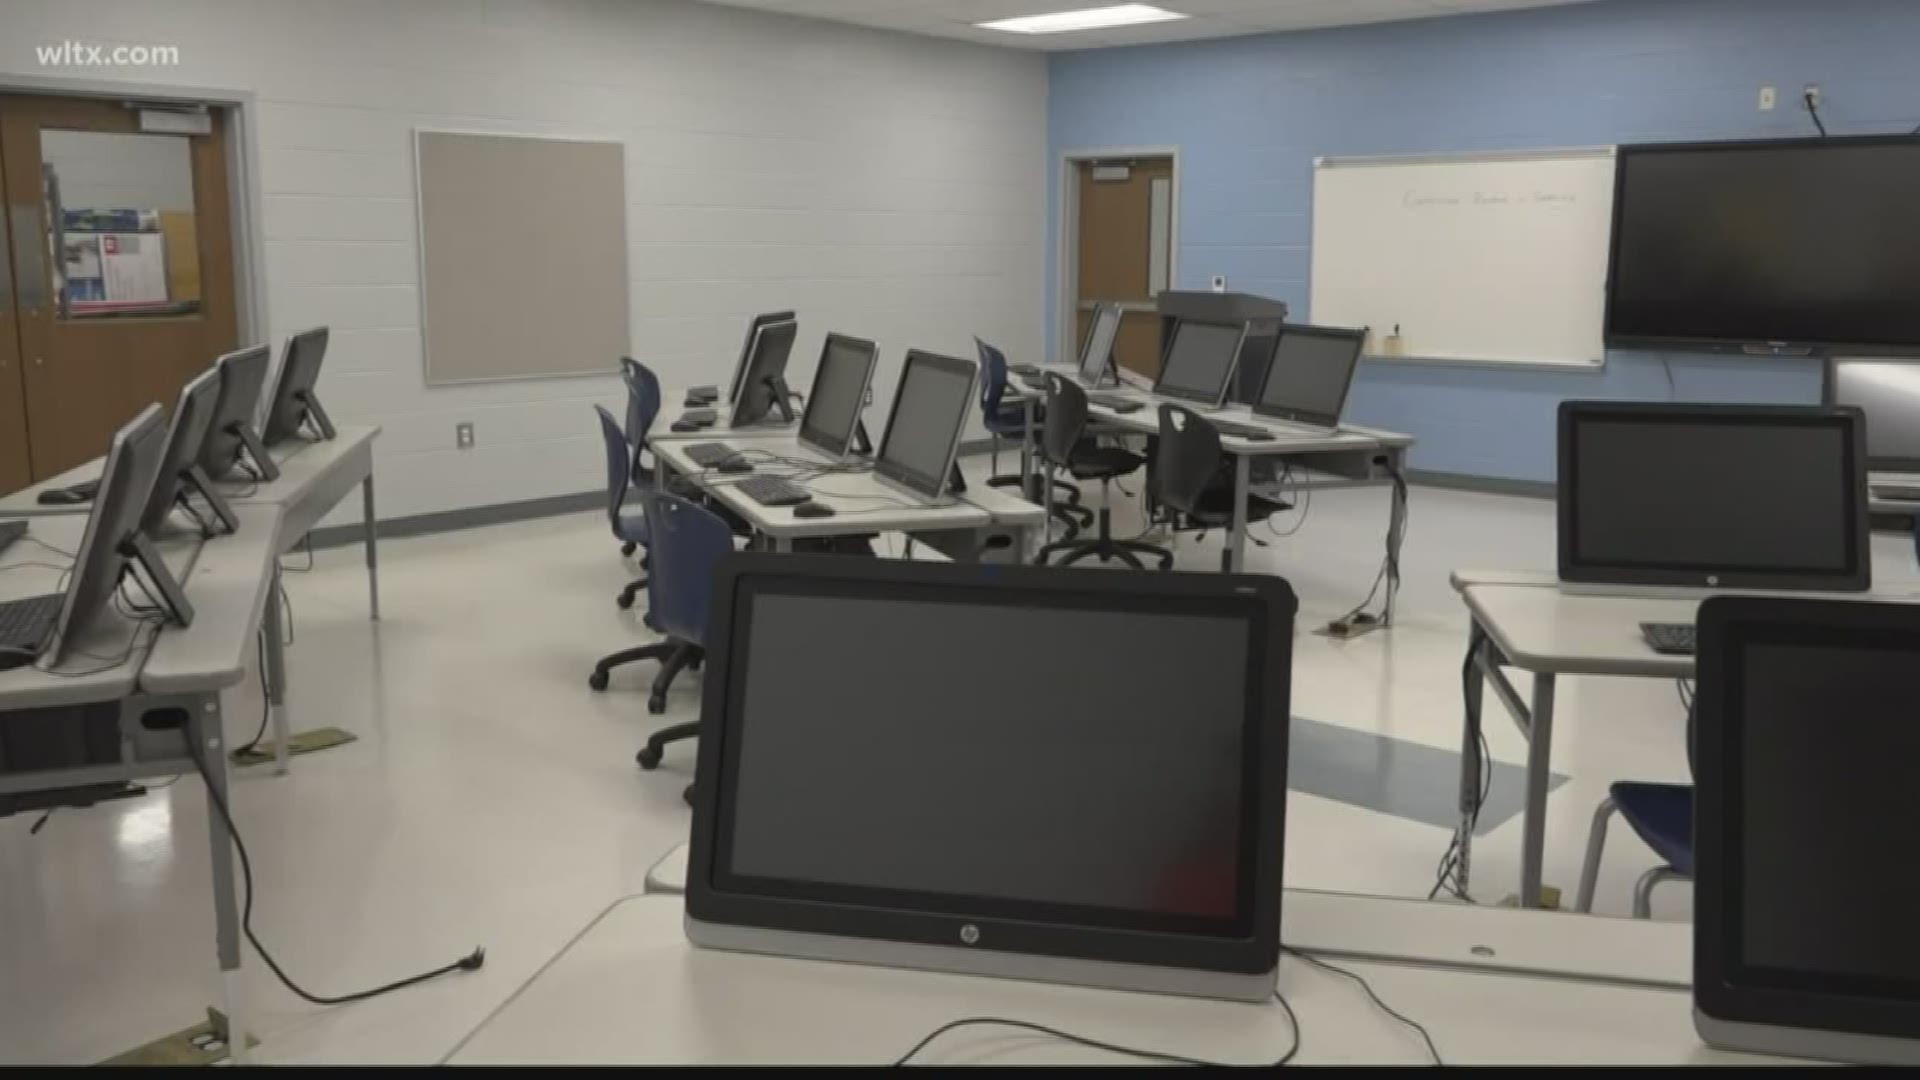 Woolard founded Kershaw county's first technology center.